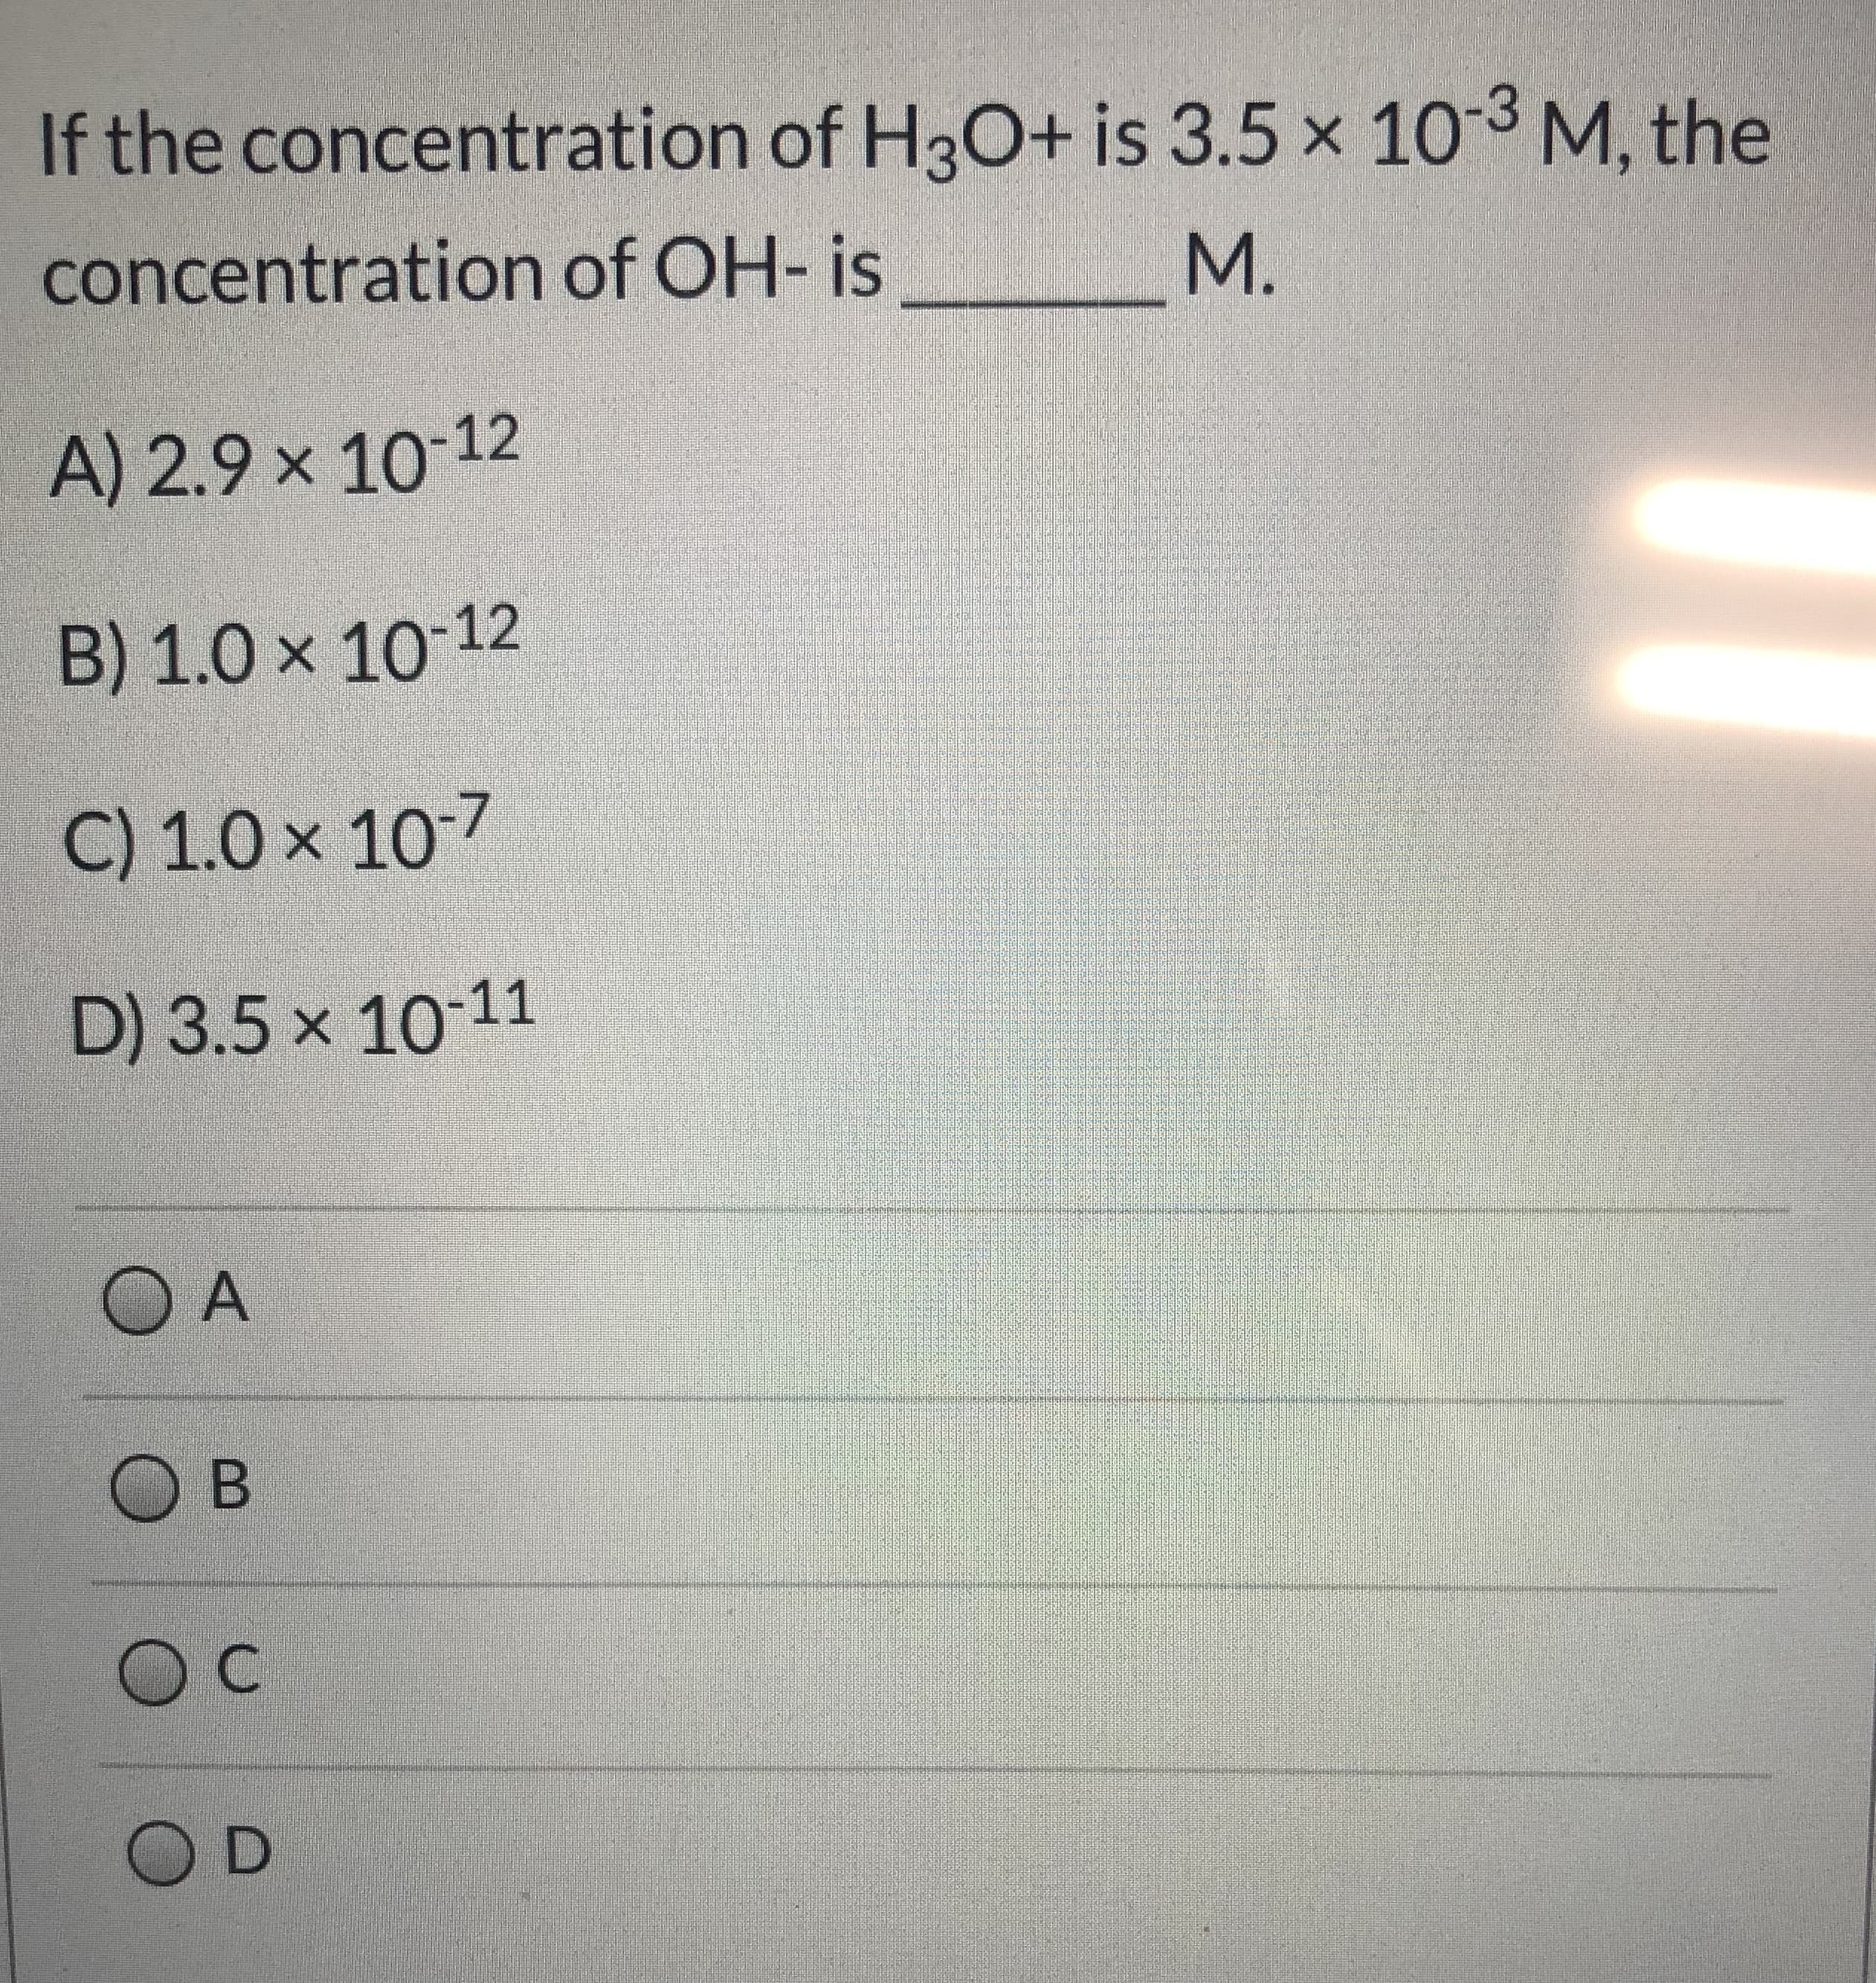 If the concentration of H3O+ is 3.5 x 103 M, the
concentration of OH- is
M.
A) 2.9 x 10-12
B) 1.0 x 10 12
C) 1.0 x 107
D) 3.5 x 10-11
O A
O B
C
O D
